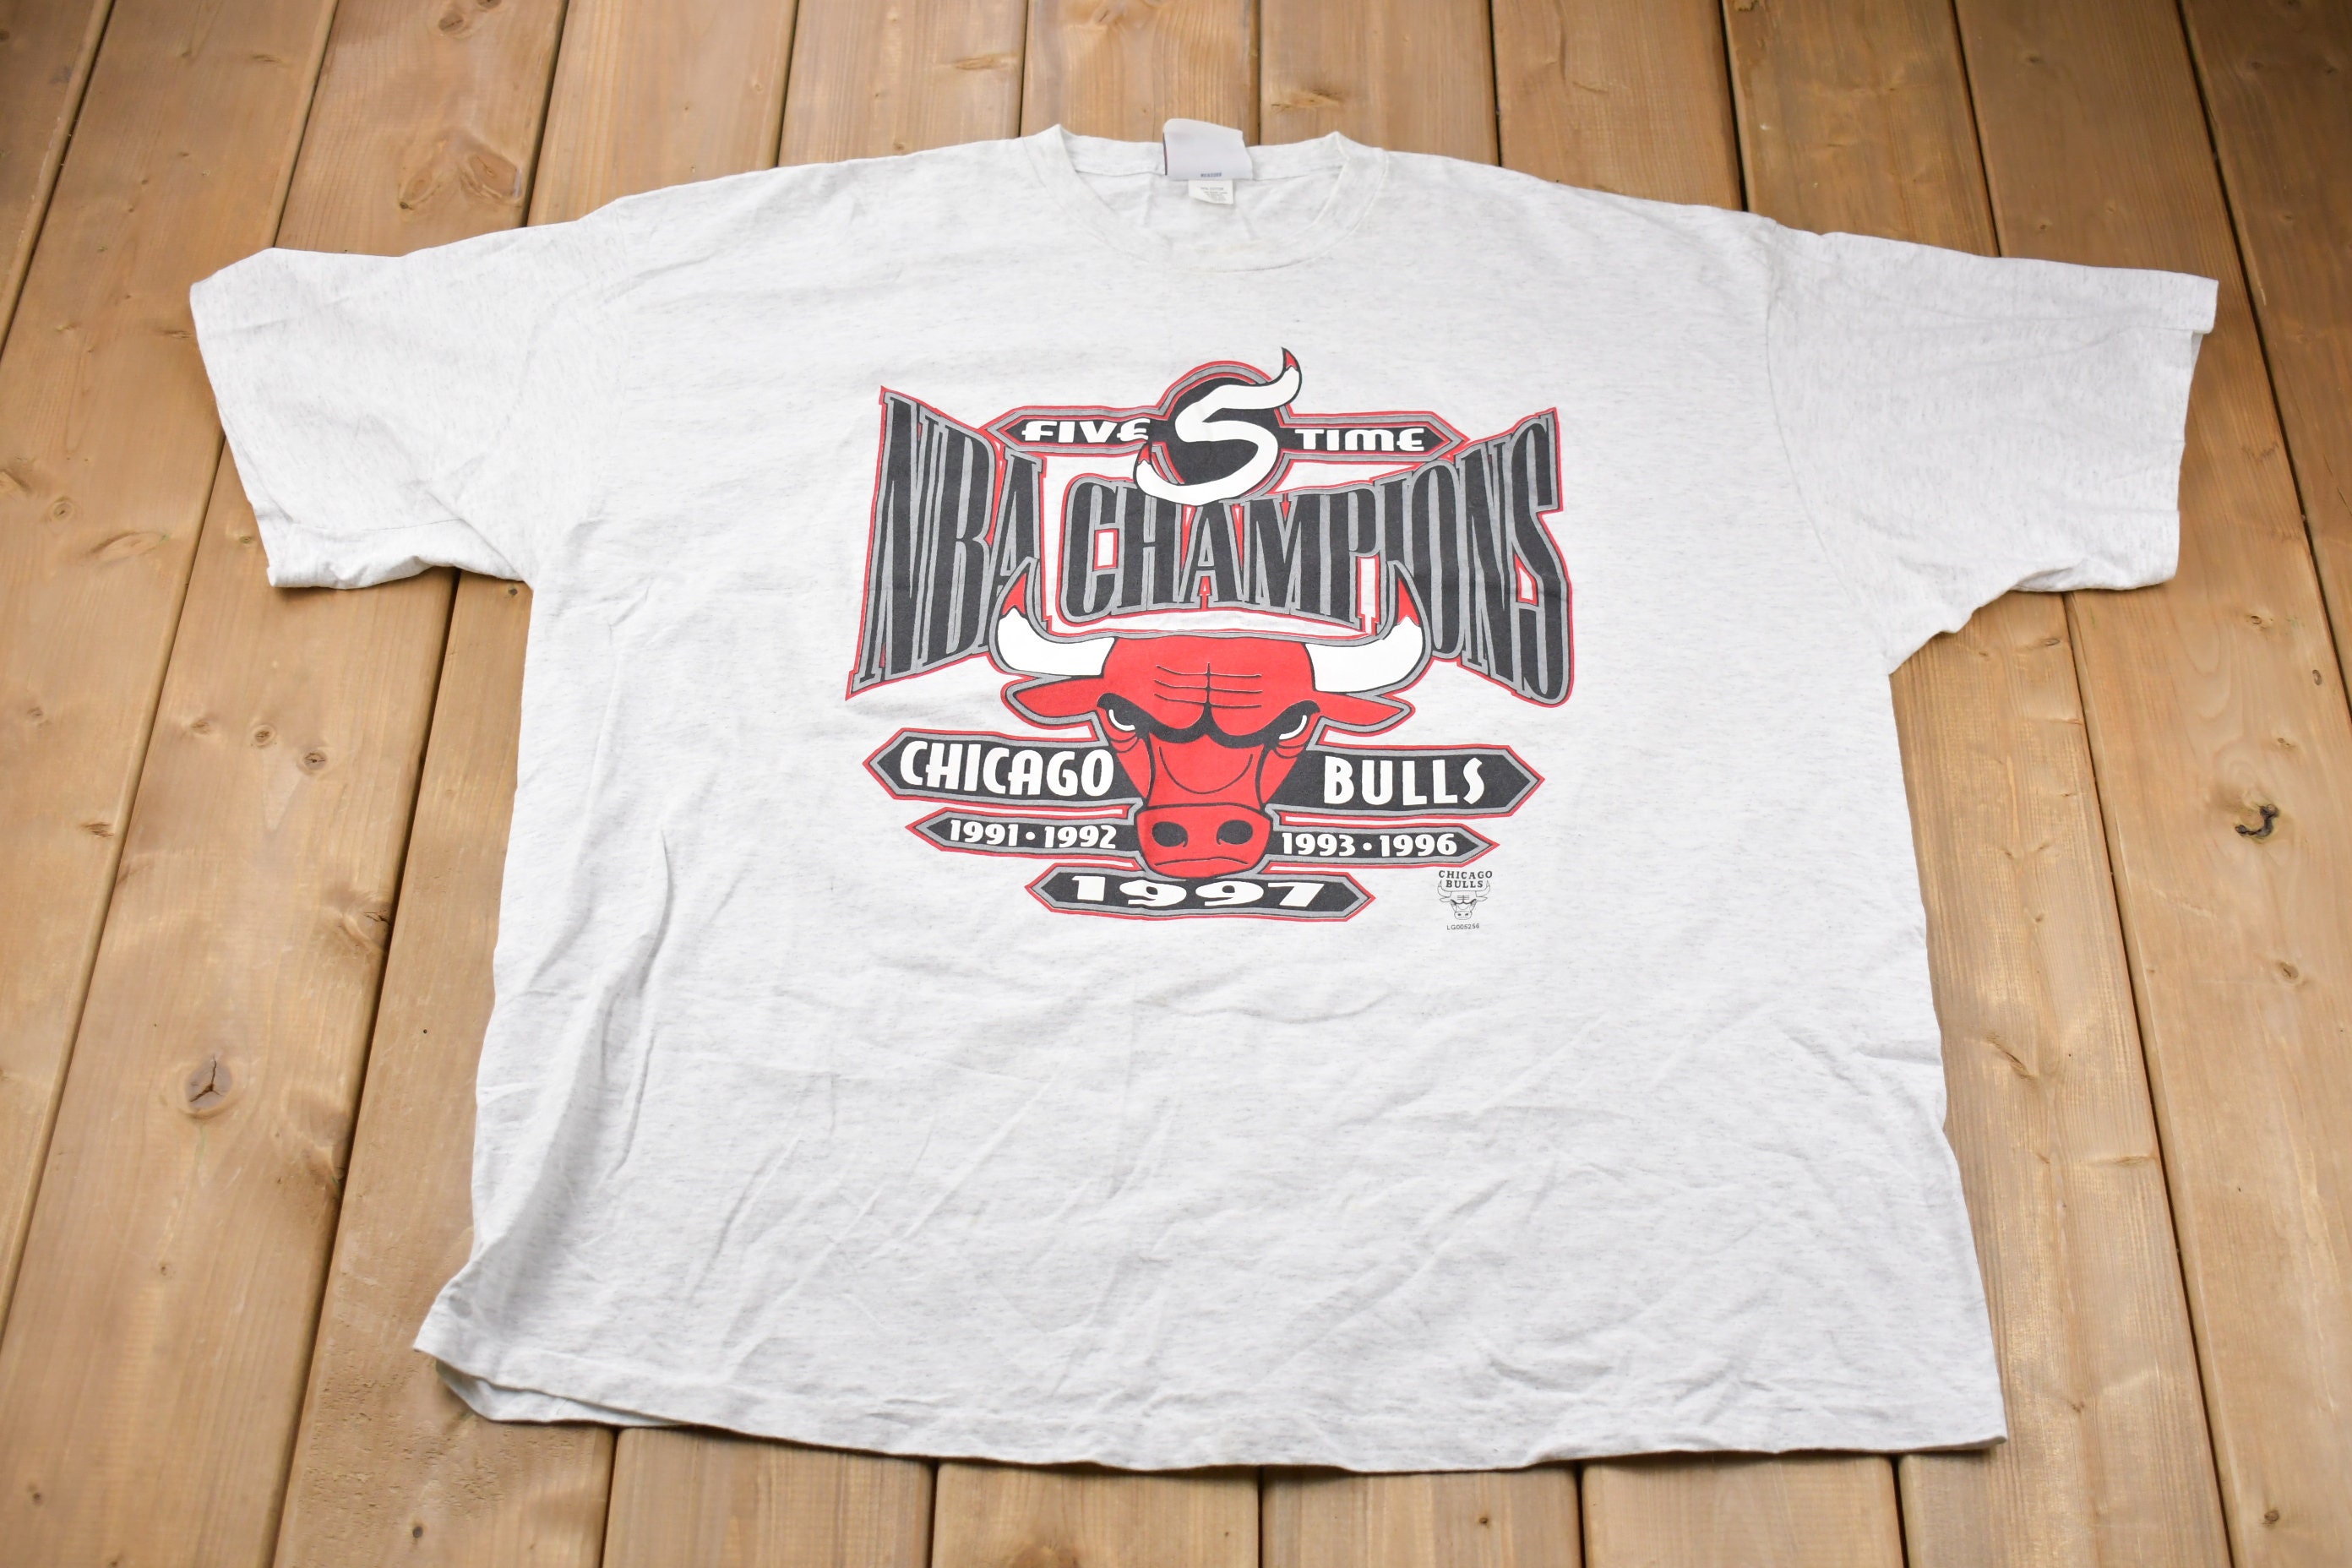 90s Chicago Bulls Merch Is Even Better Than You Remember